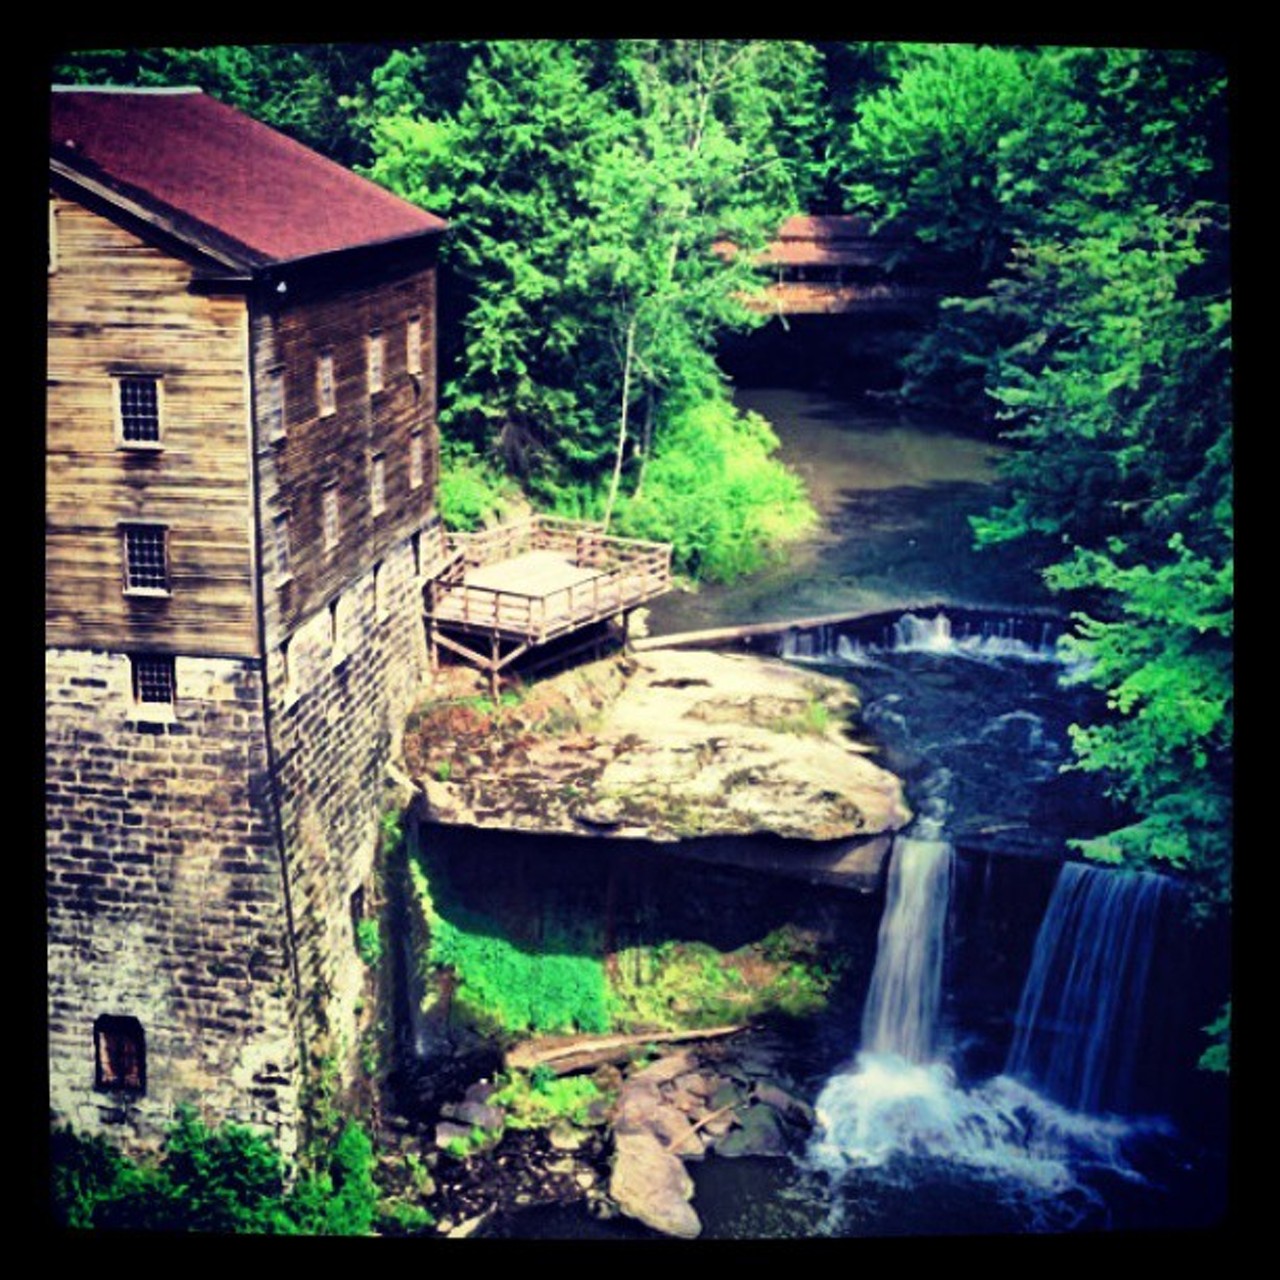 Originally built in 1846 and restored in 1985, visiting Mahoning County’s Lanterman’s Mill is like travelling back in time. The mill is functional, producing cornmeal, buckwheat and flour available for purchase. The view of the mill surrounded by the colorful leaves is absolutely breathtaking.